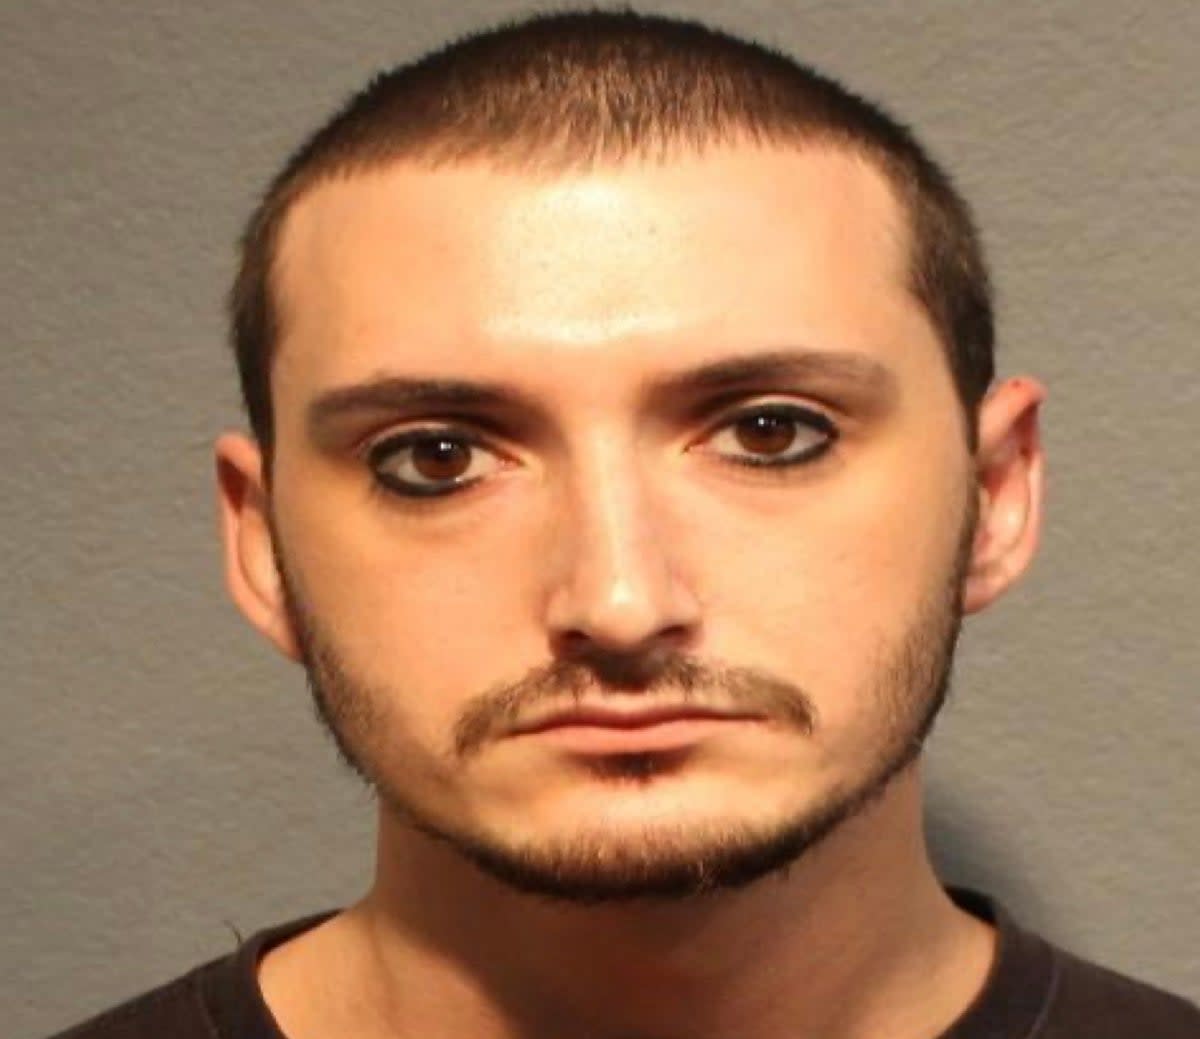 25-year-old Giovanni Impellizzari has been hit with child sex abuse image and child endangerment charges (Cumberland County Prosecutor’s Office)